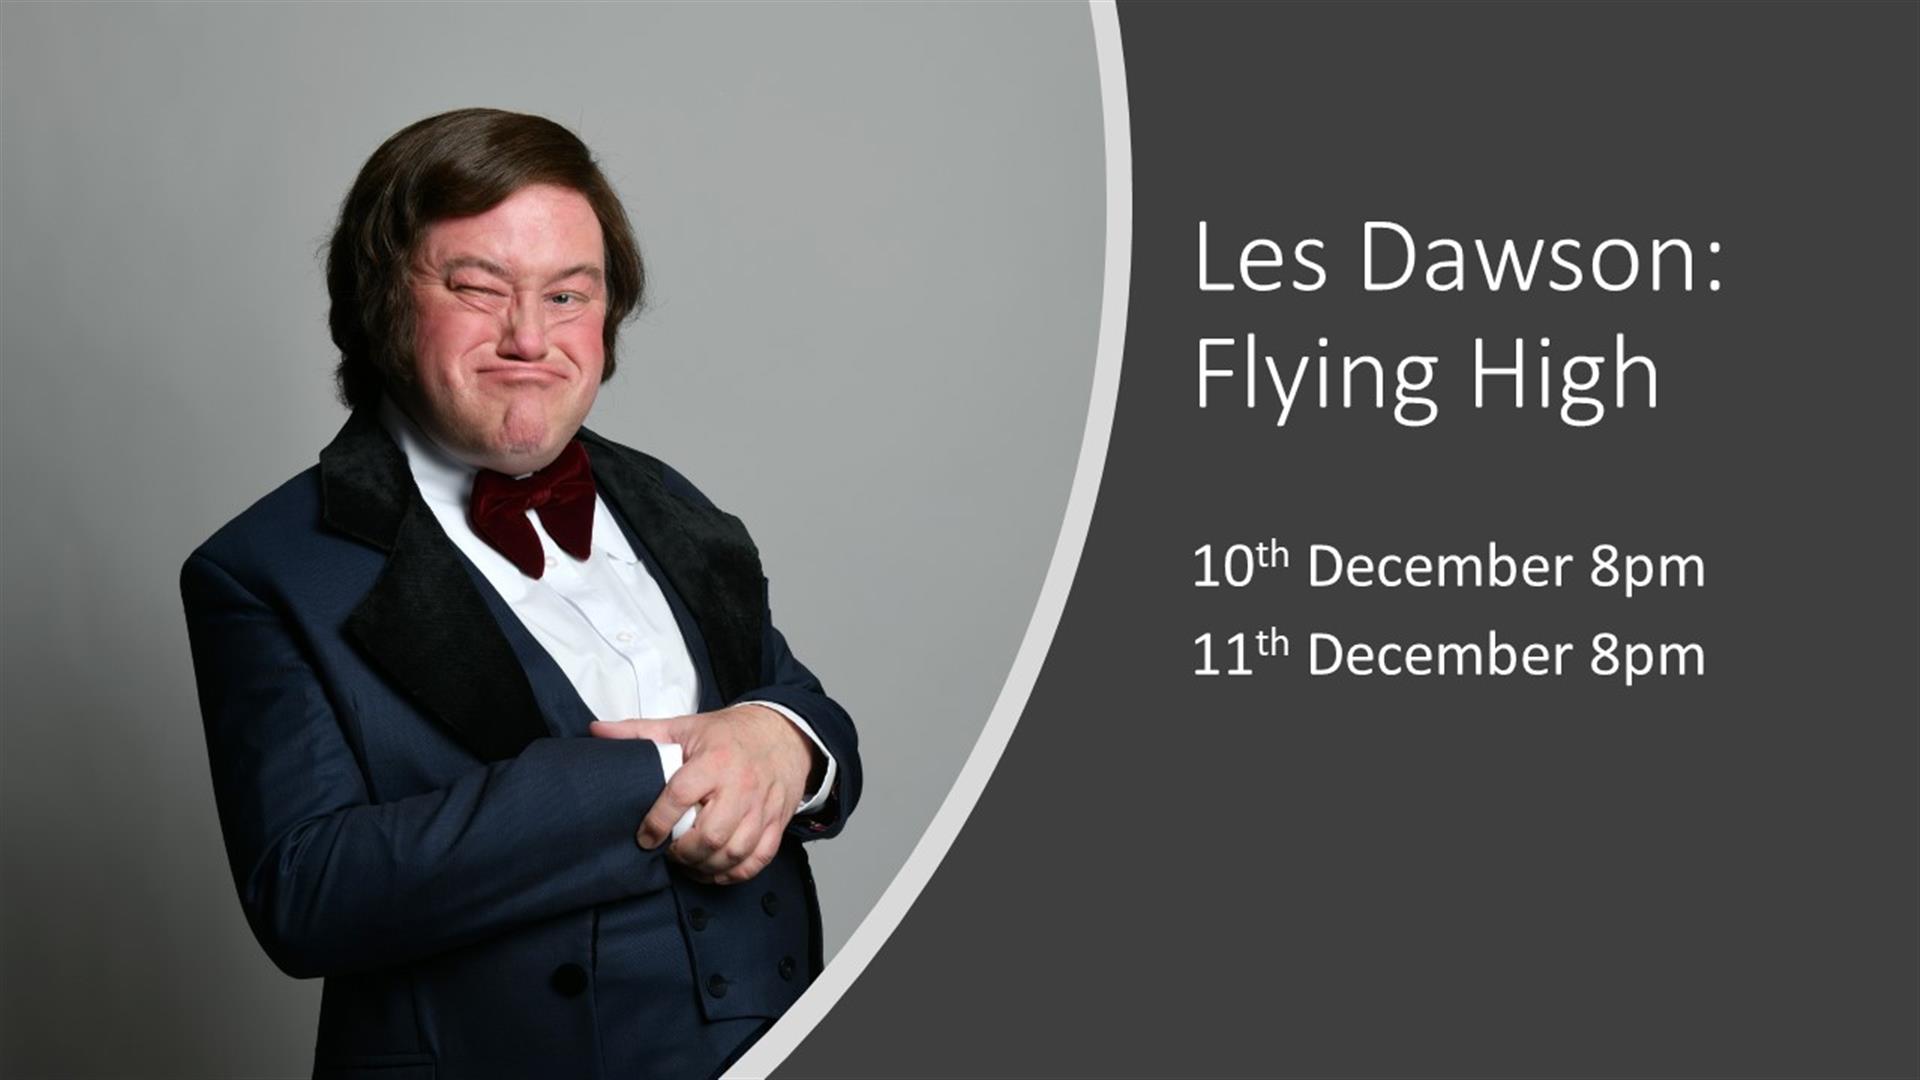 Les Dawson: Flying High - Lowther Pavilion